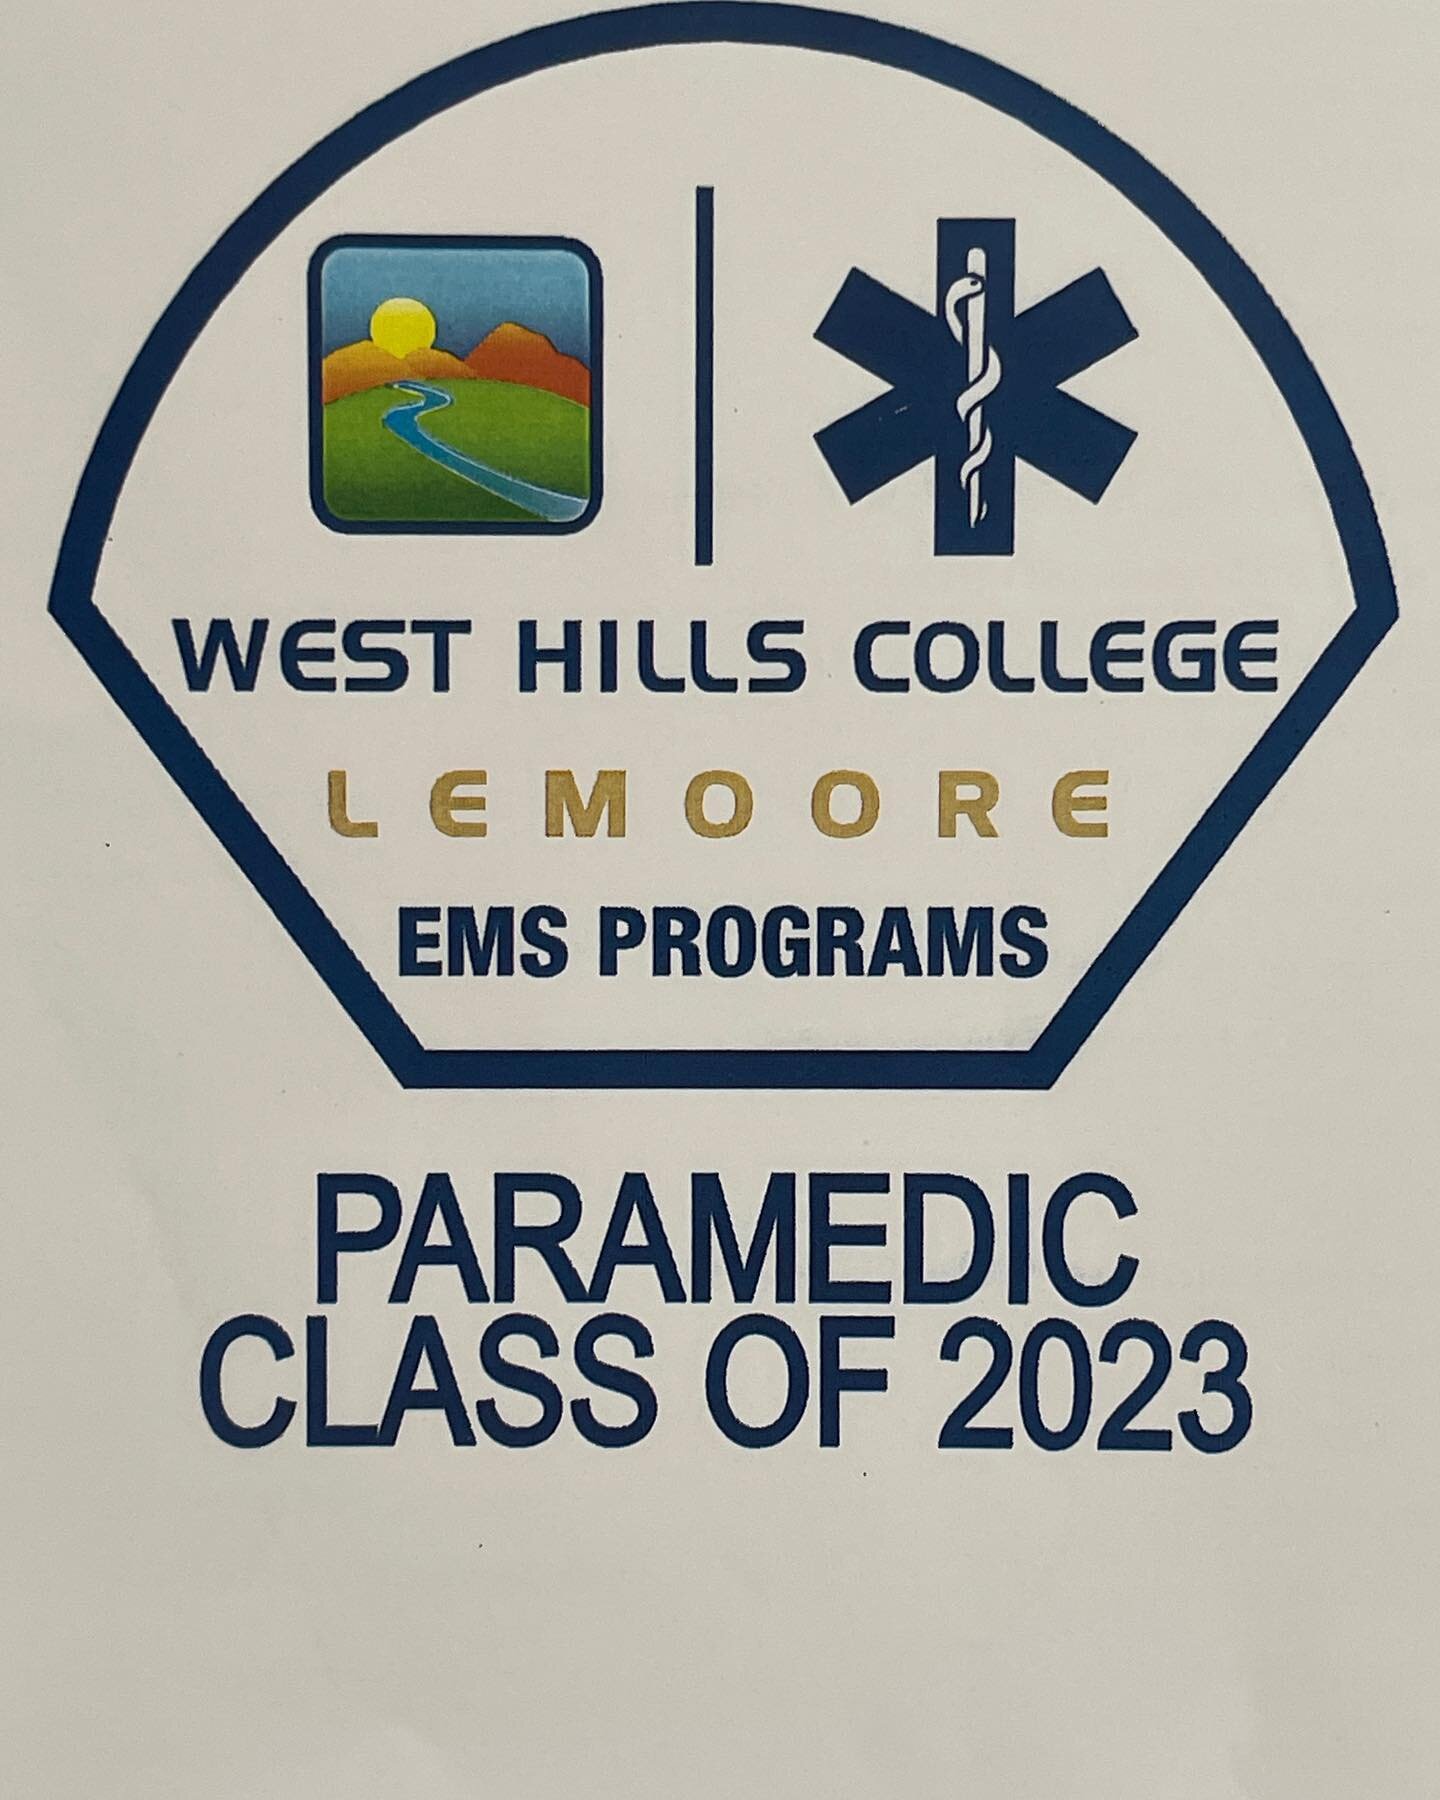 Congratulations to our new West Hills Paramedic Program graduates from Madera and Pistoresi Ambulance.  Great job to Sukhvir Singh and Joseph Lopez who were Emts at Pistoresi Ambulance.  Also graduating are Adrianna Contreras and Robert Quijano from 